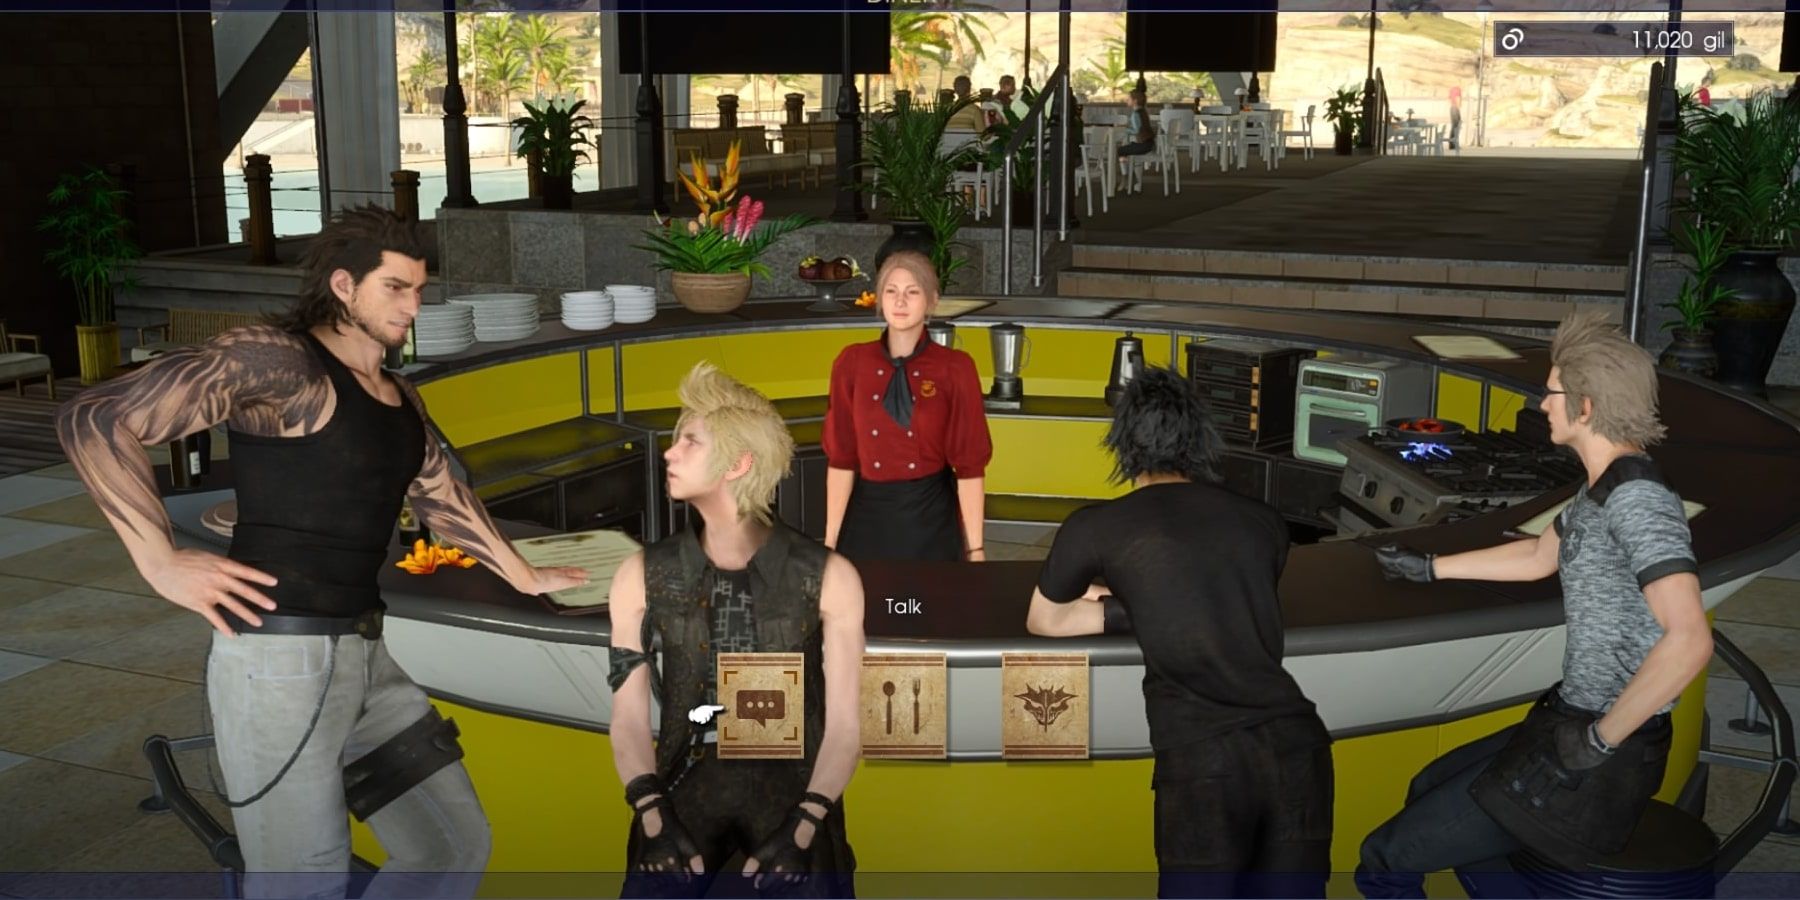 Mother of Pearl Restaurant from Final Fantasy XV